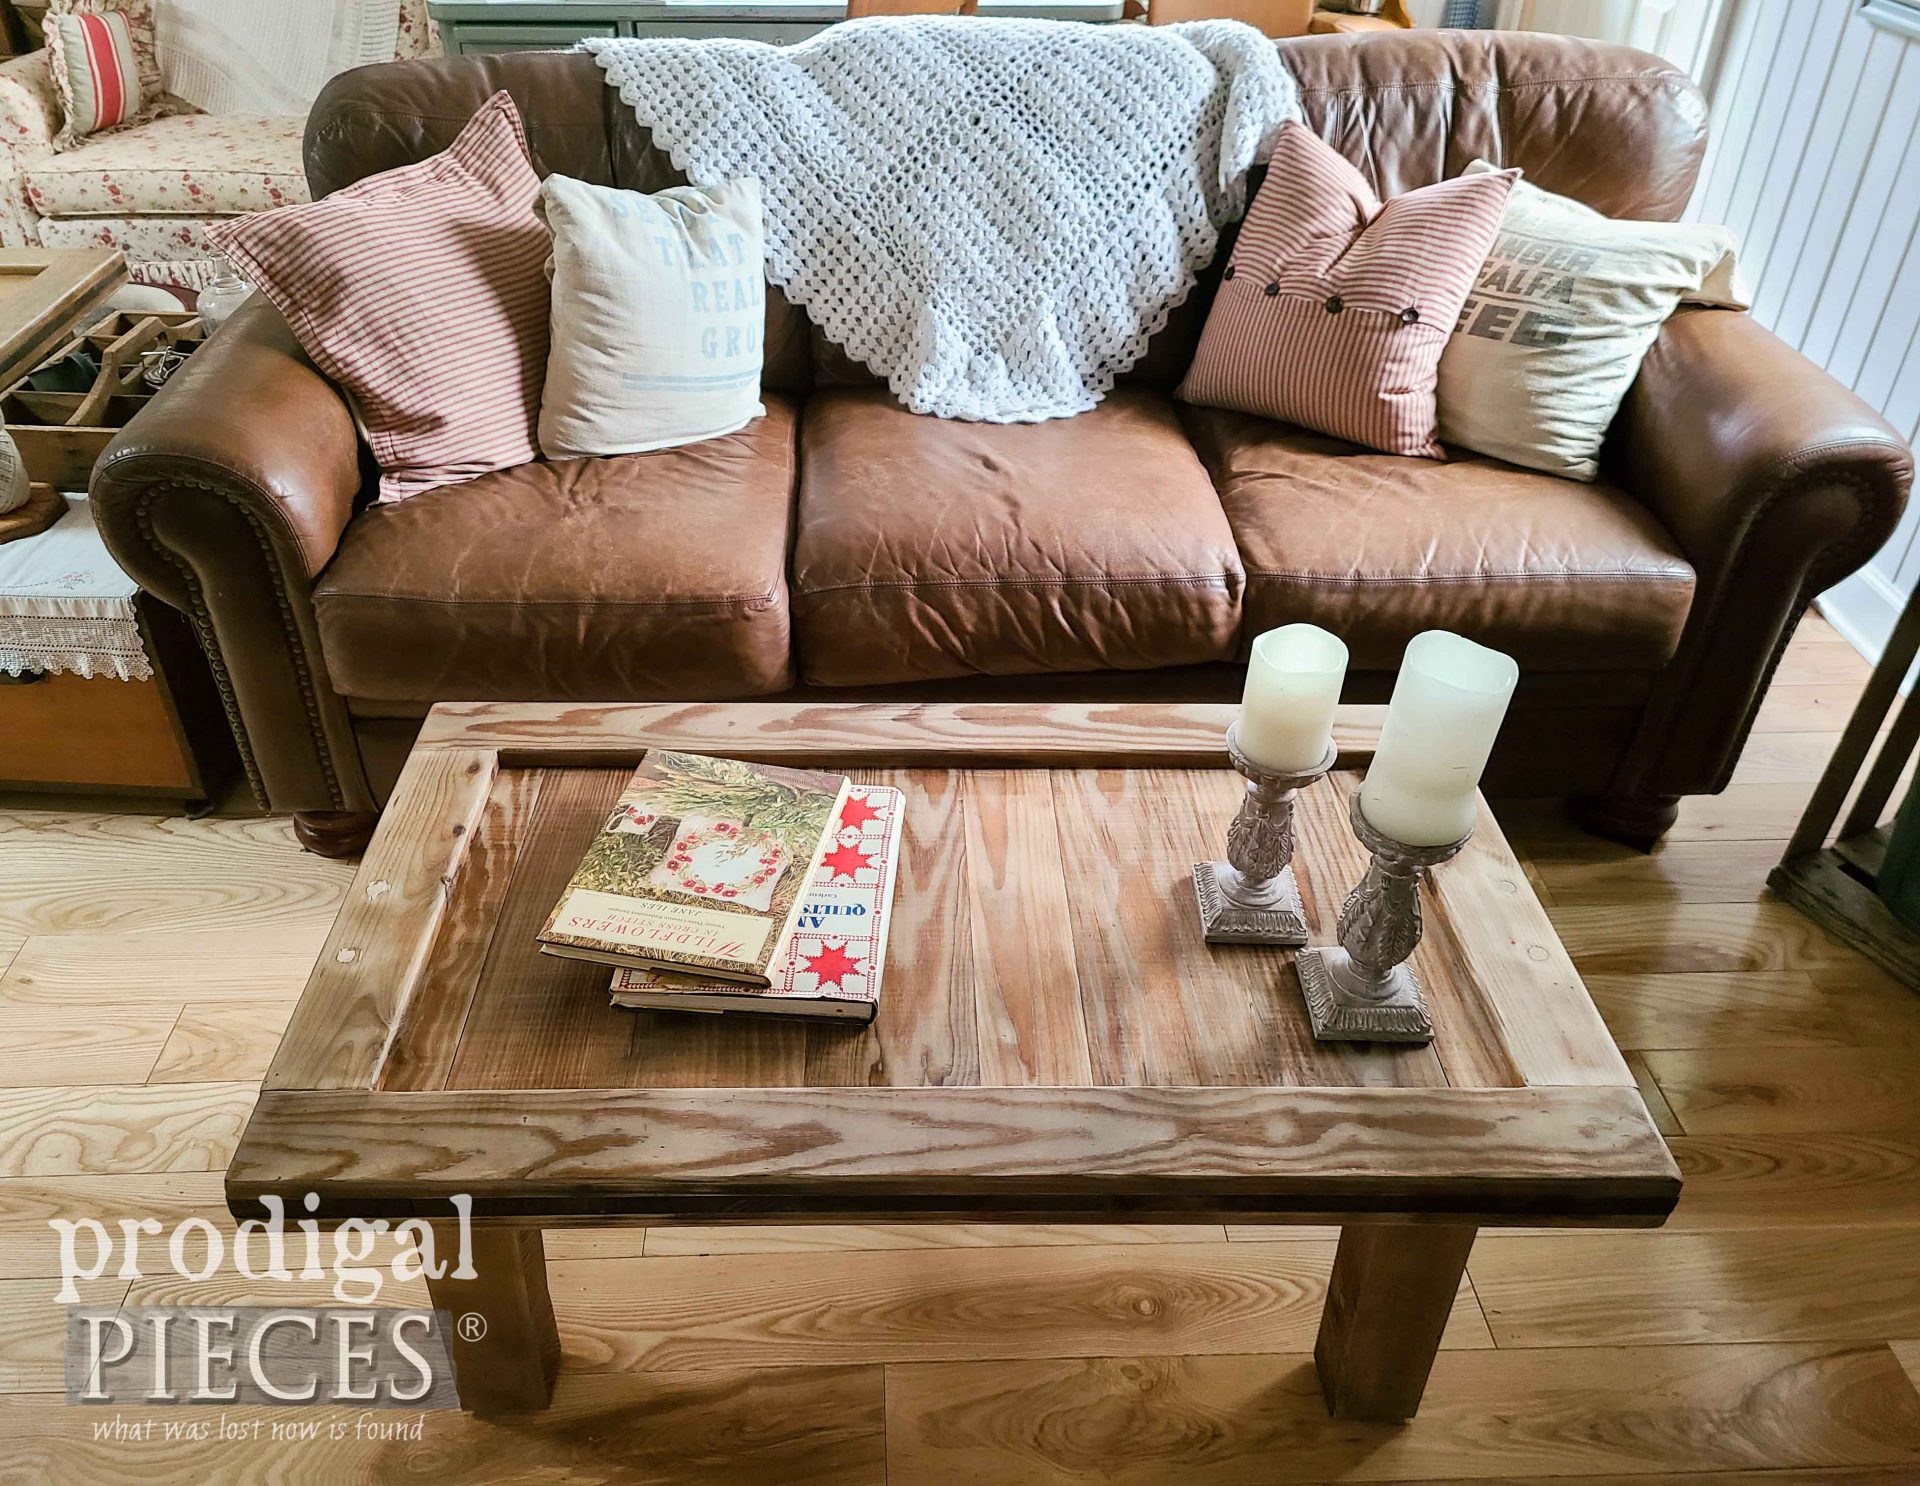 DIY Farmhouse Upcycled Coffee Table Built by Larissa of Prodigal Pieces | prodigalpieces.com #prodigalpieces #furniture #farmhouse #livingroom #homedecor